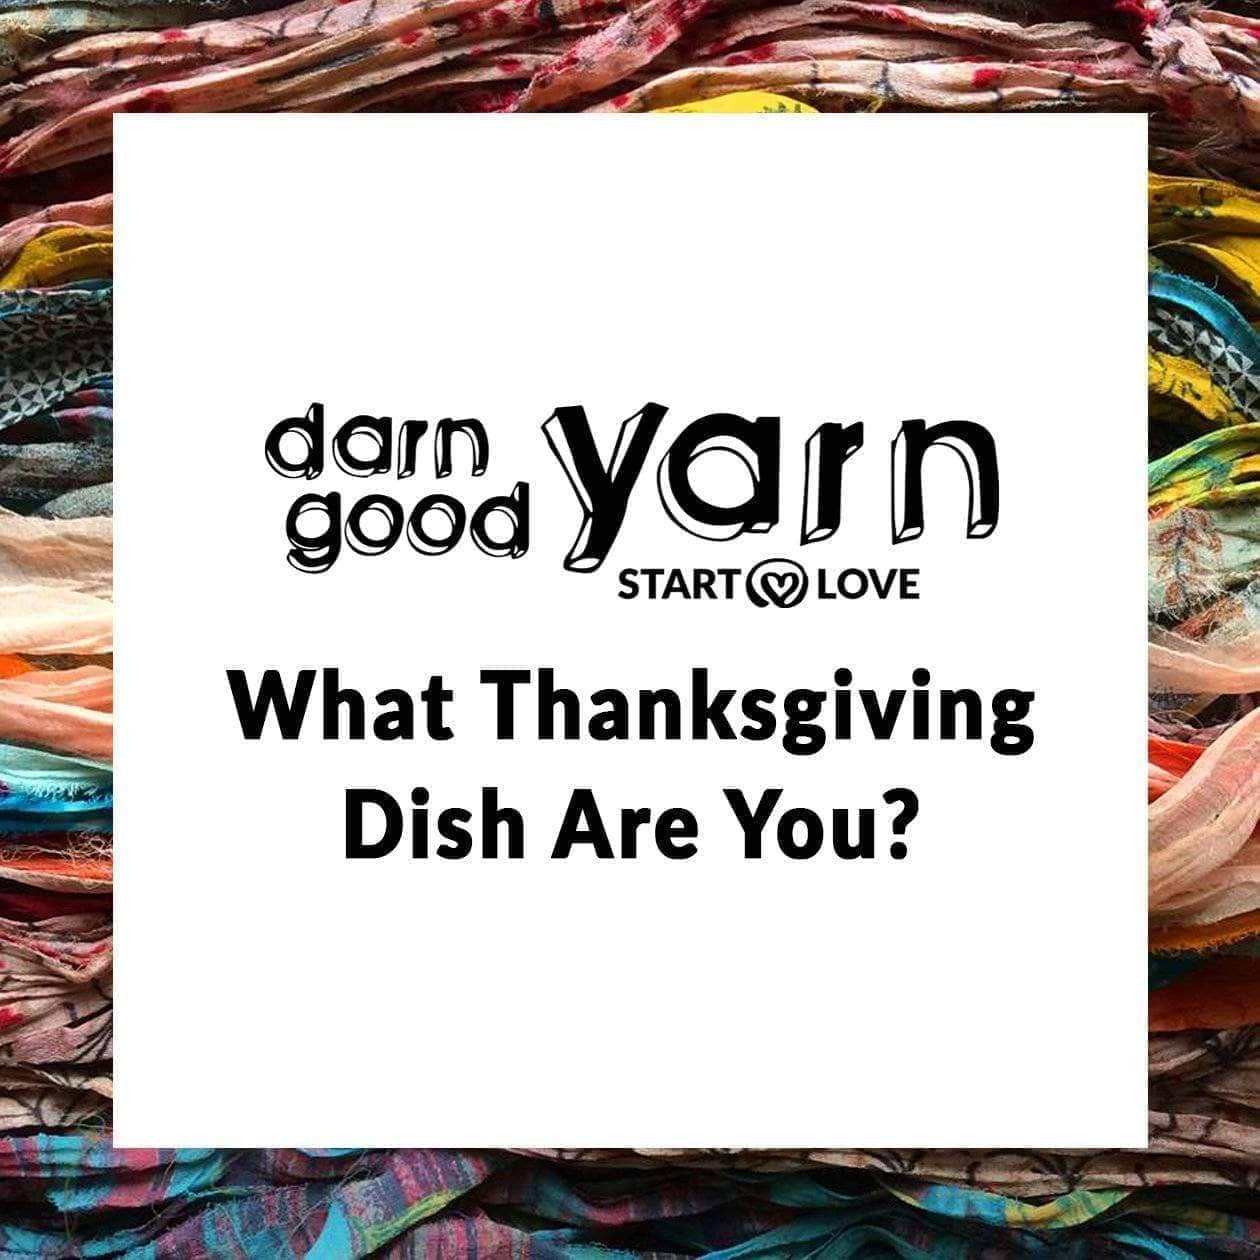 What Thanksgiving Dish Are You? - Darn Good Yarn